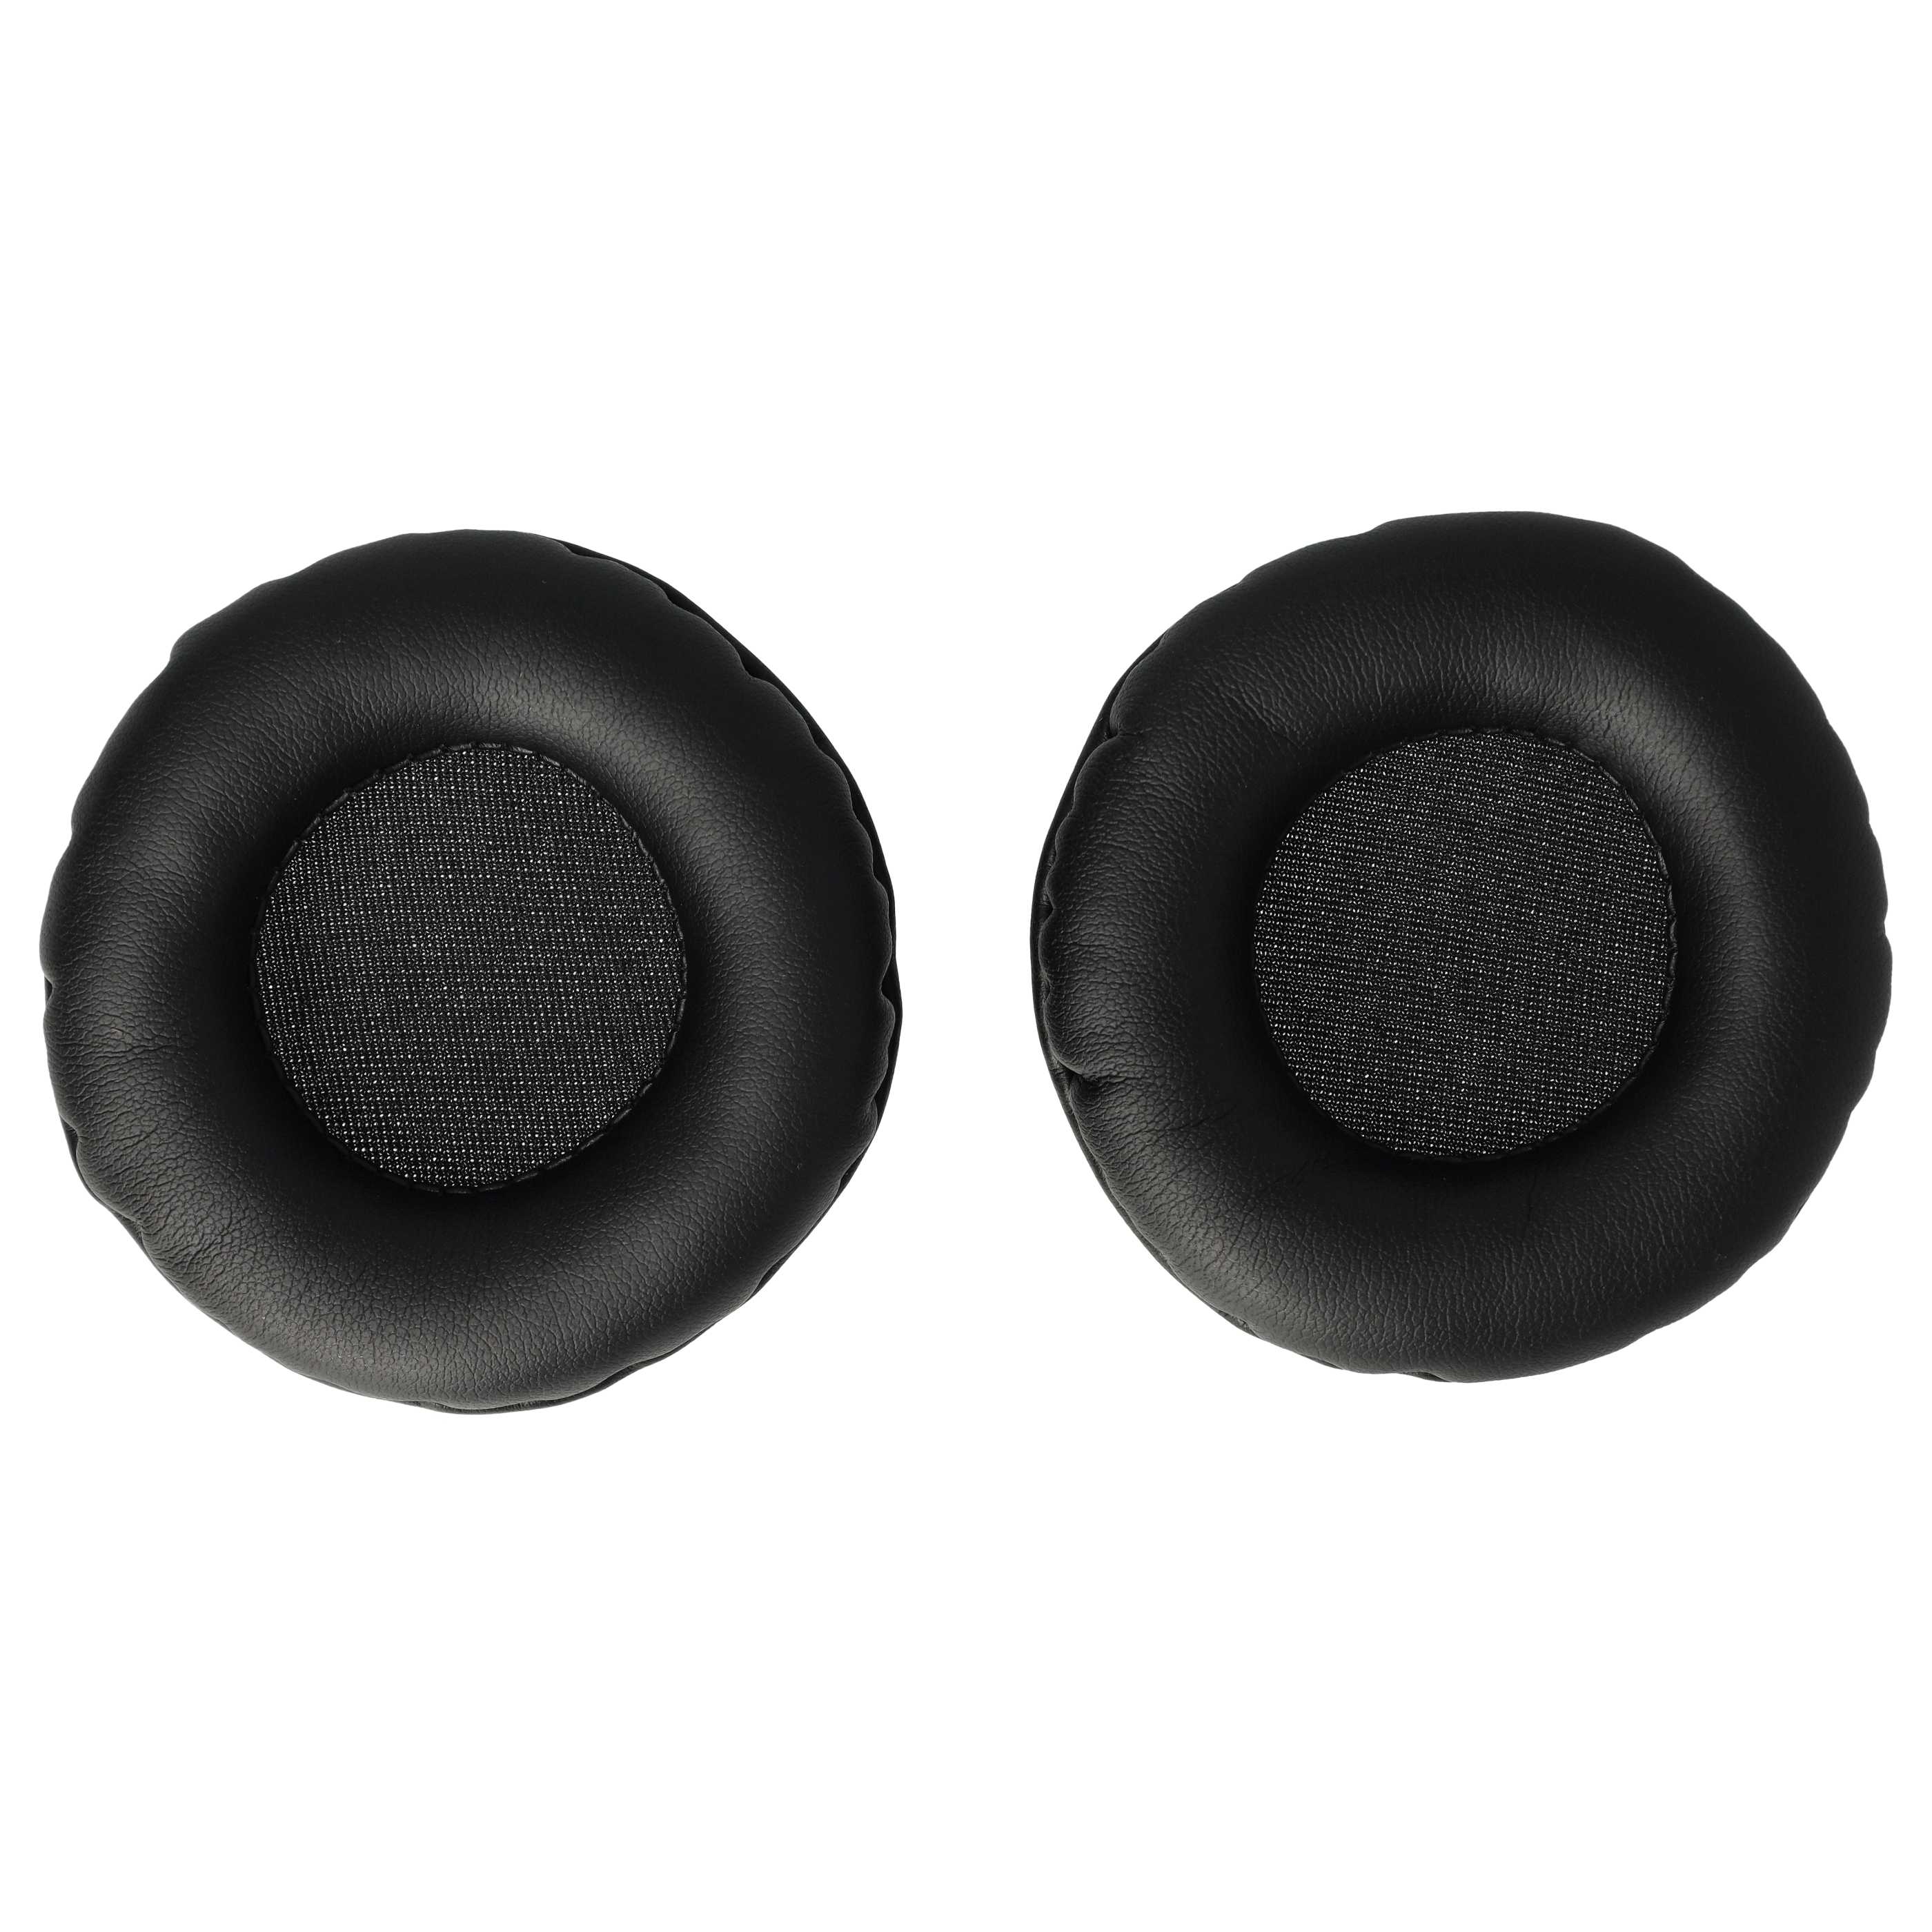 2x Ear Pads suitable for headphones which require 65mm ear pads / t.Bone HD 660 Headphones etc. - polyurethane